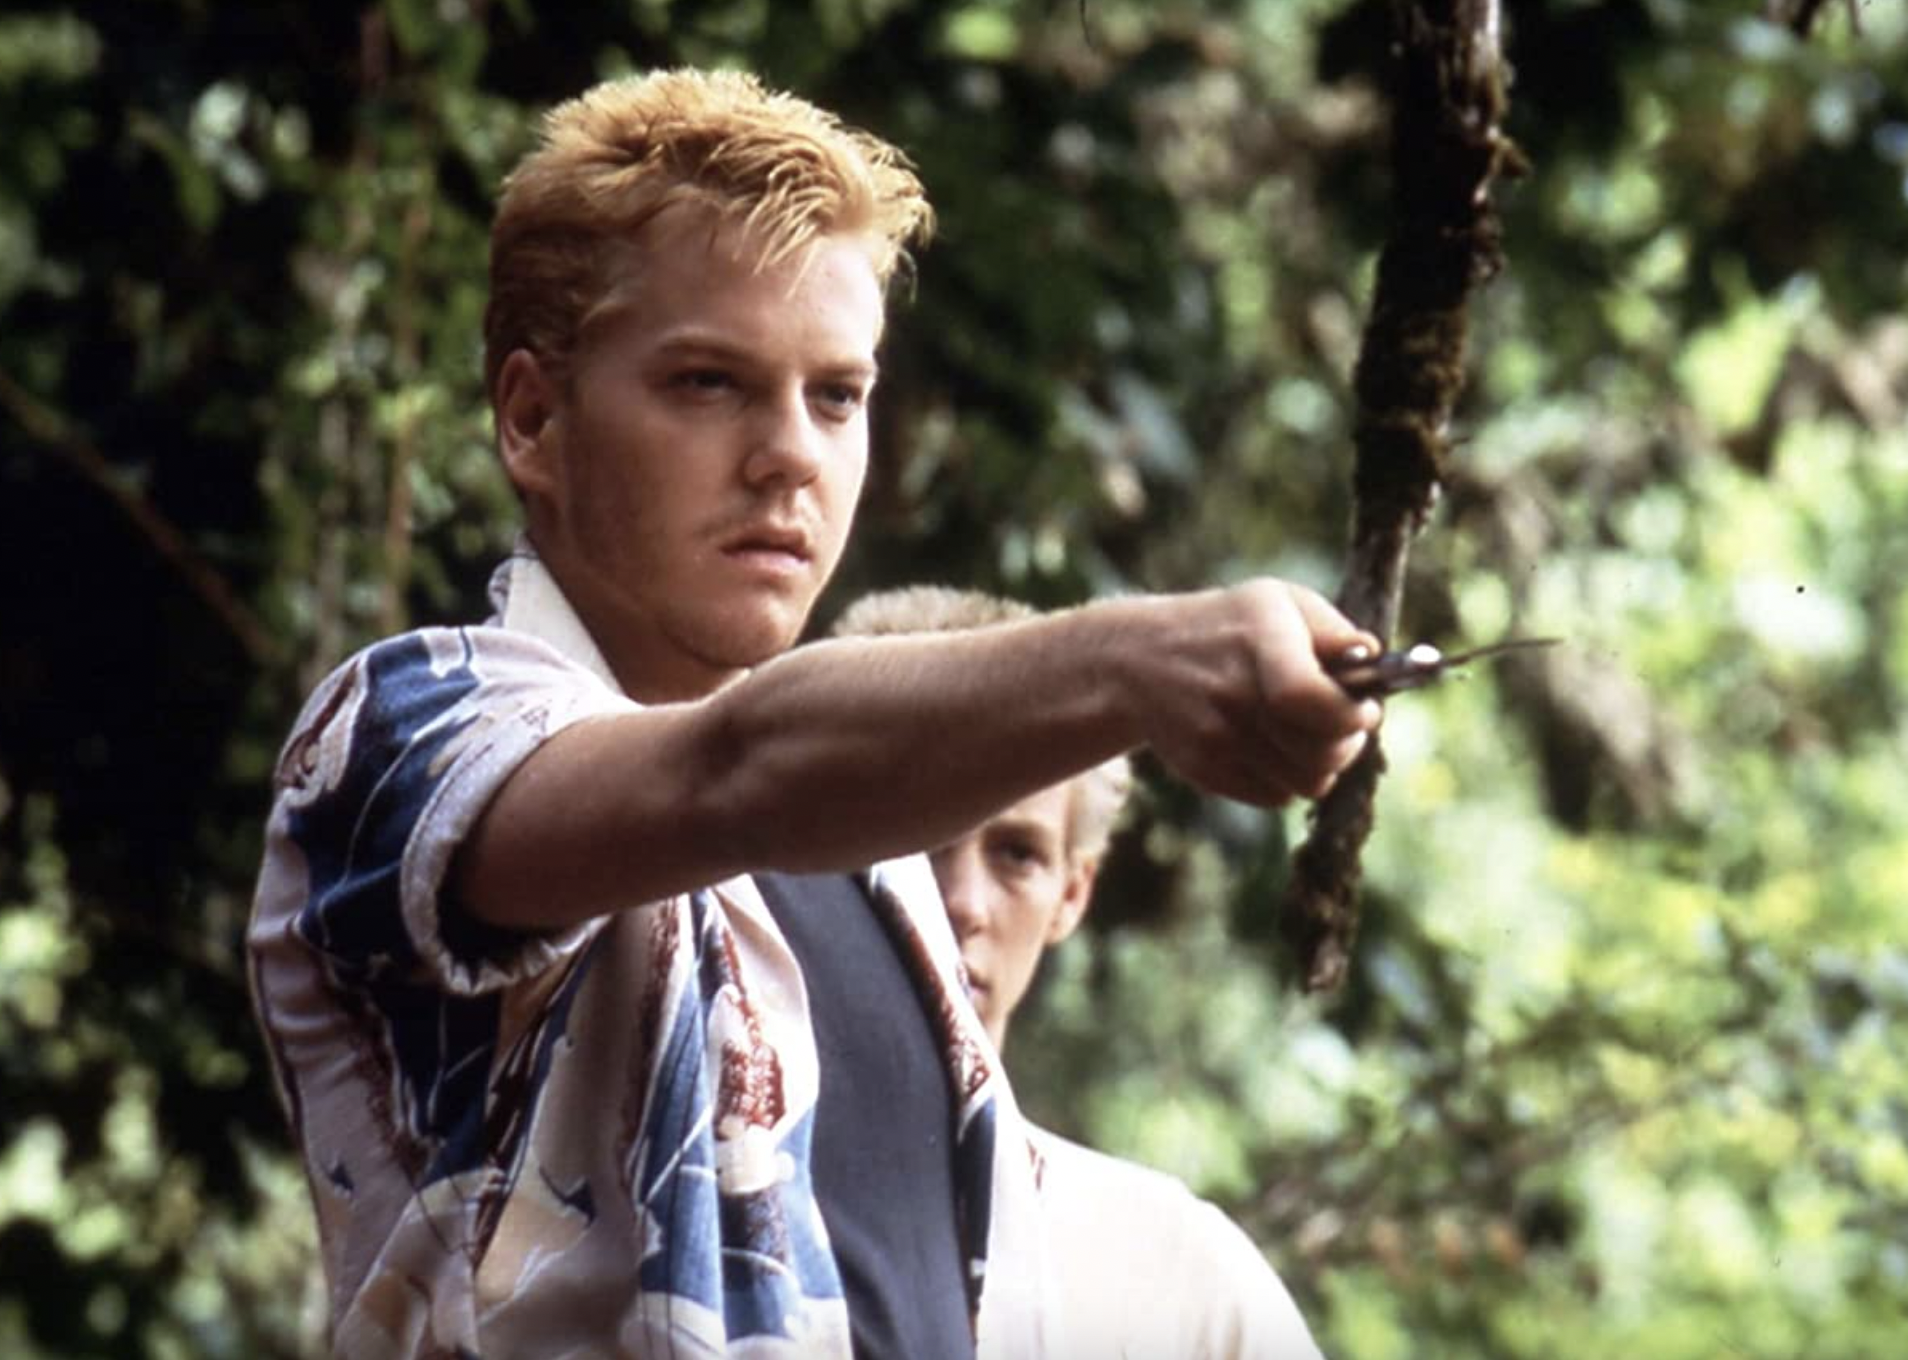 Kiefer Sutherland in "Stand by Me".